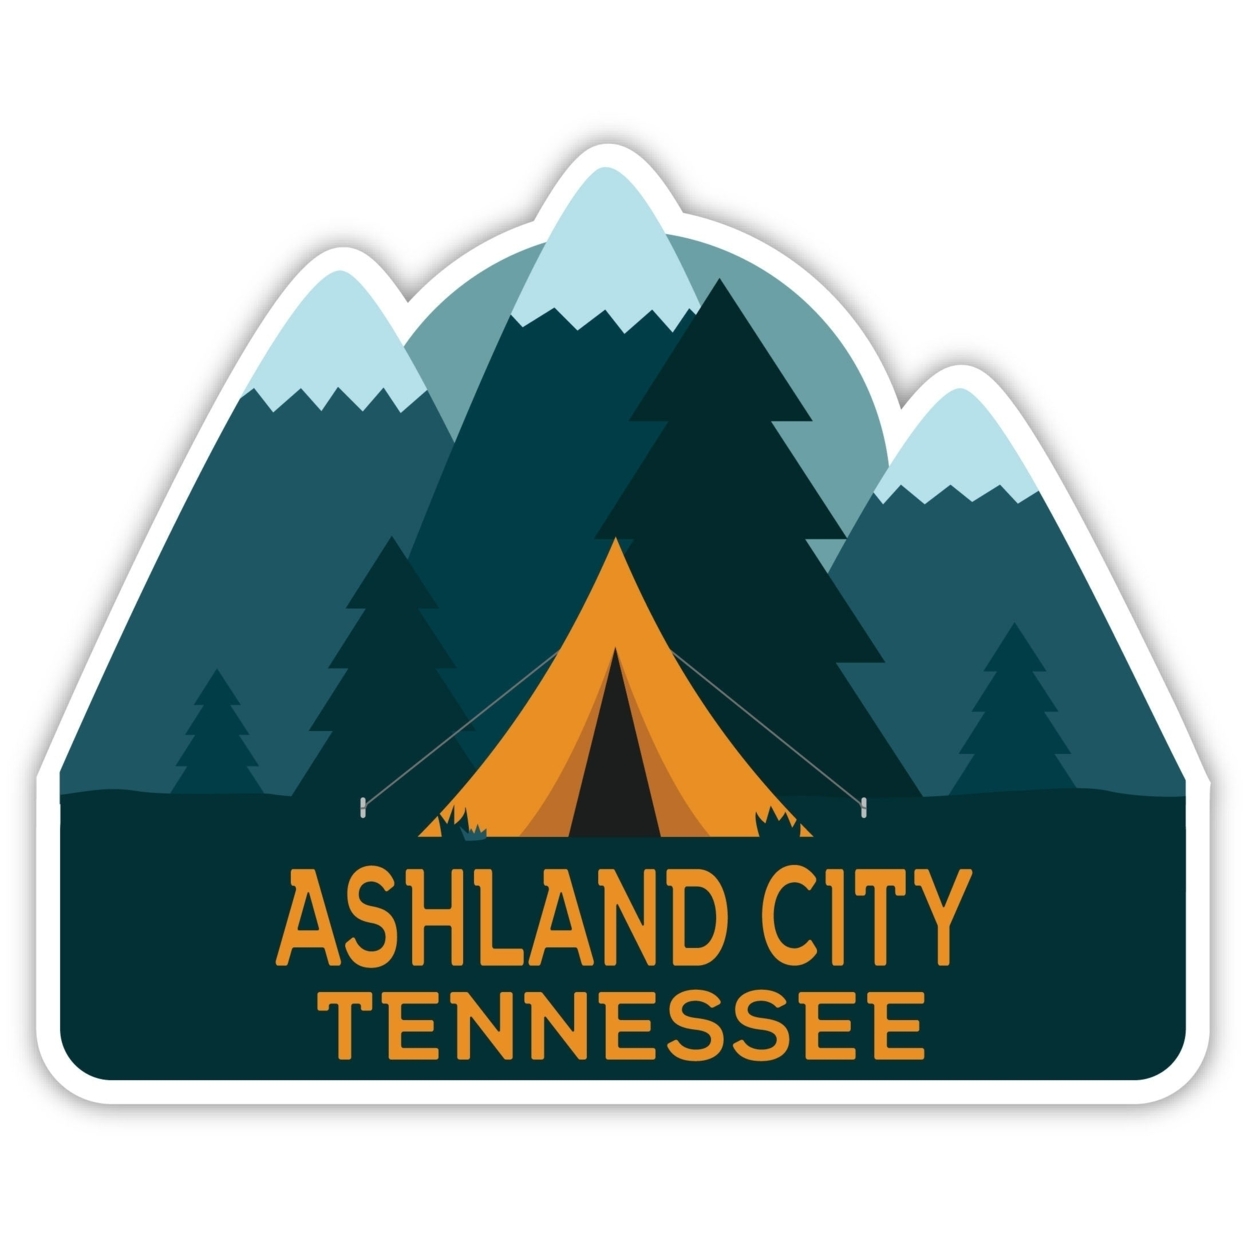 Ashland City Tennessee Souvenir Decorative Stickers (Choose Theme And Size) - 4-Pack, 4-Inch, Tent